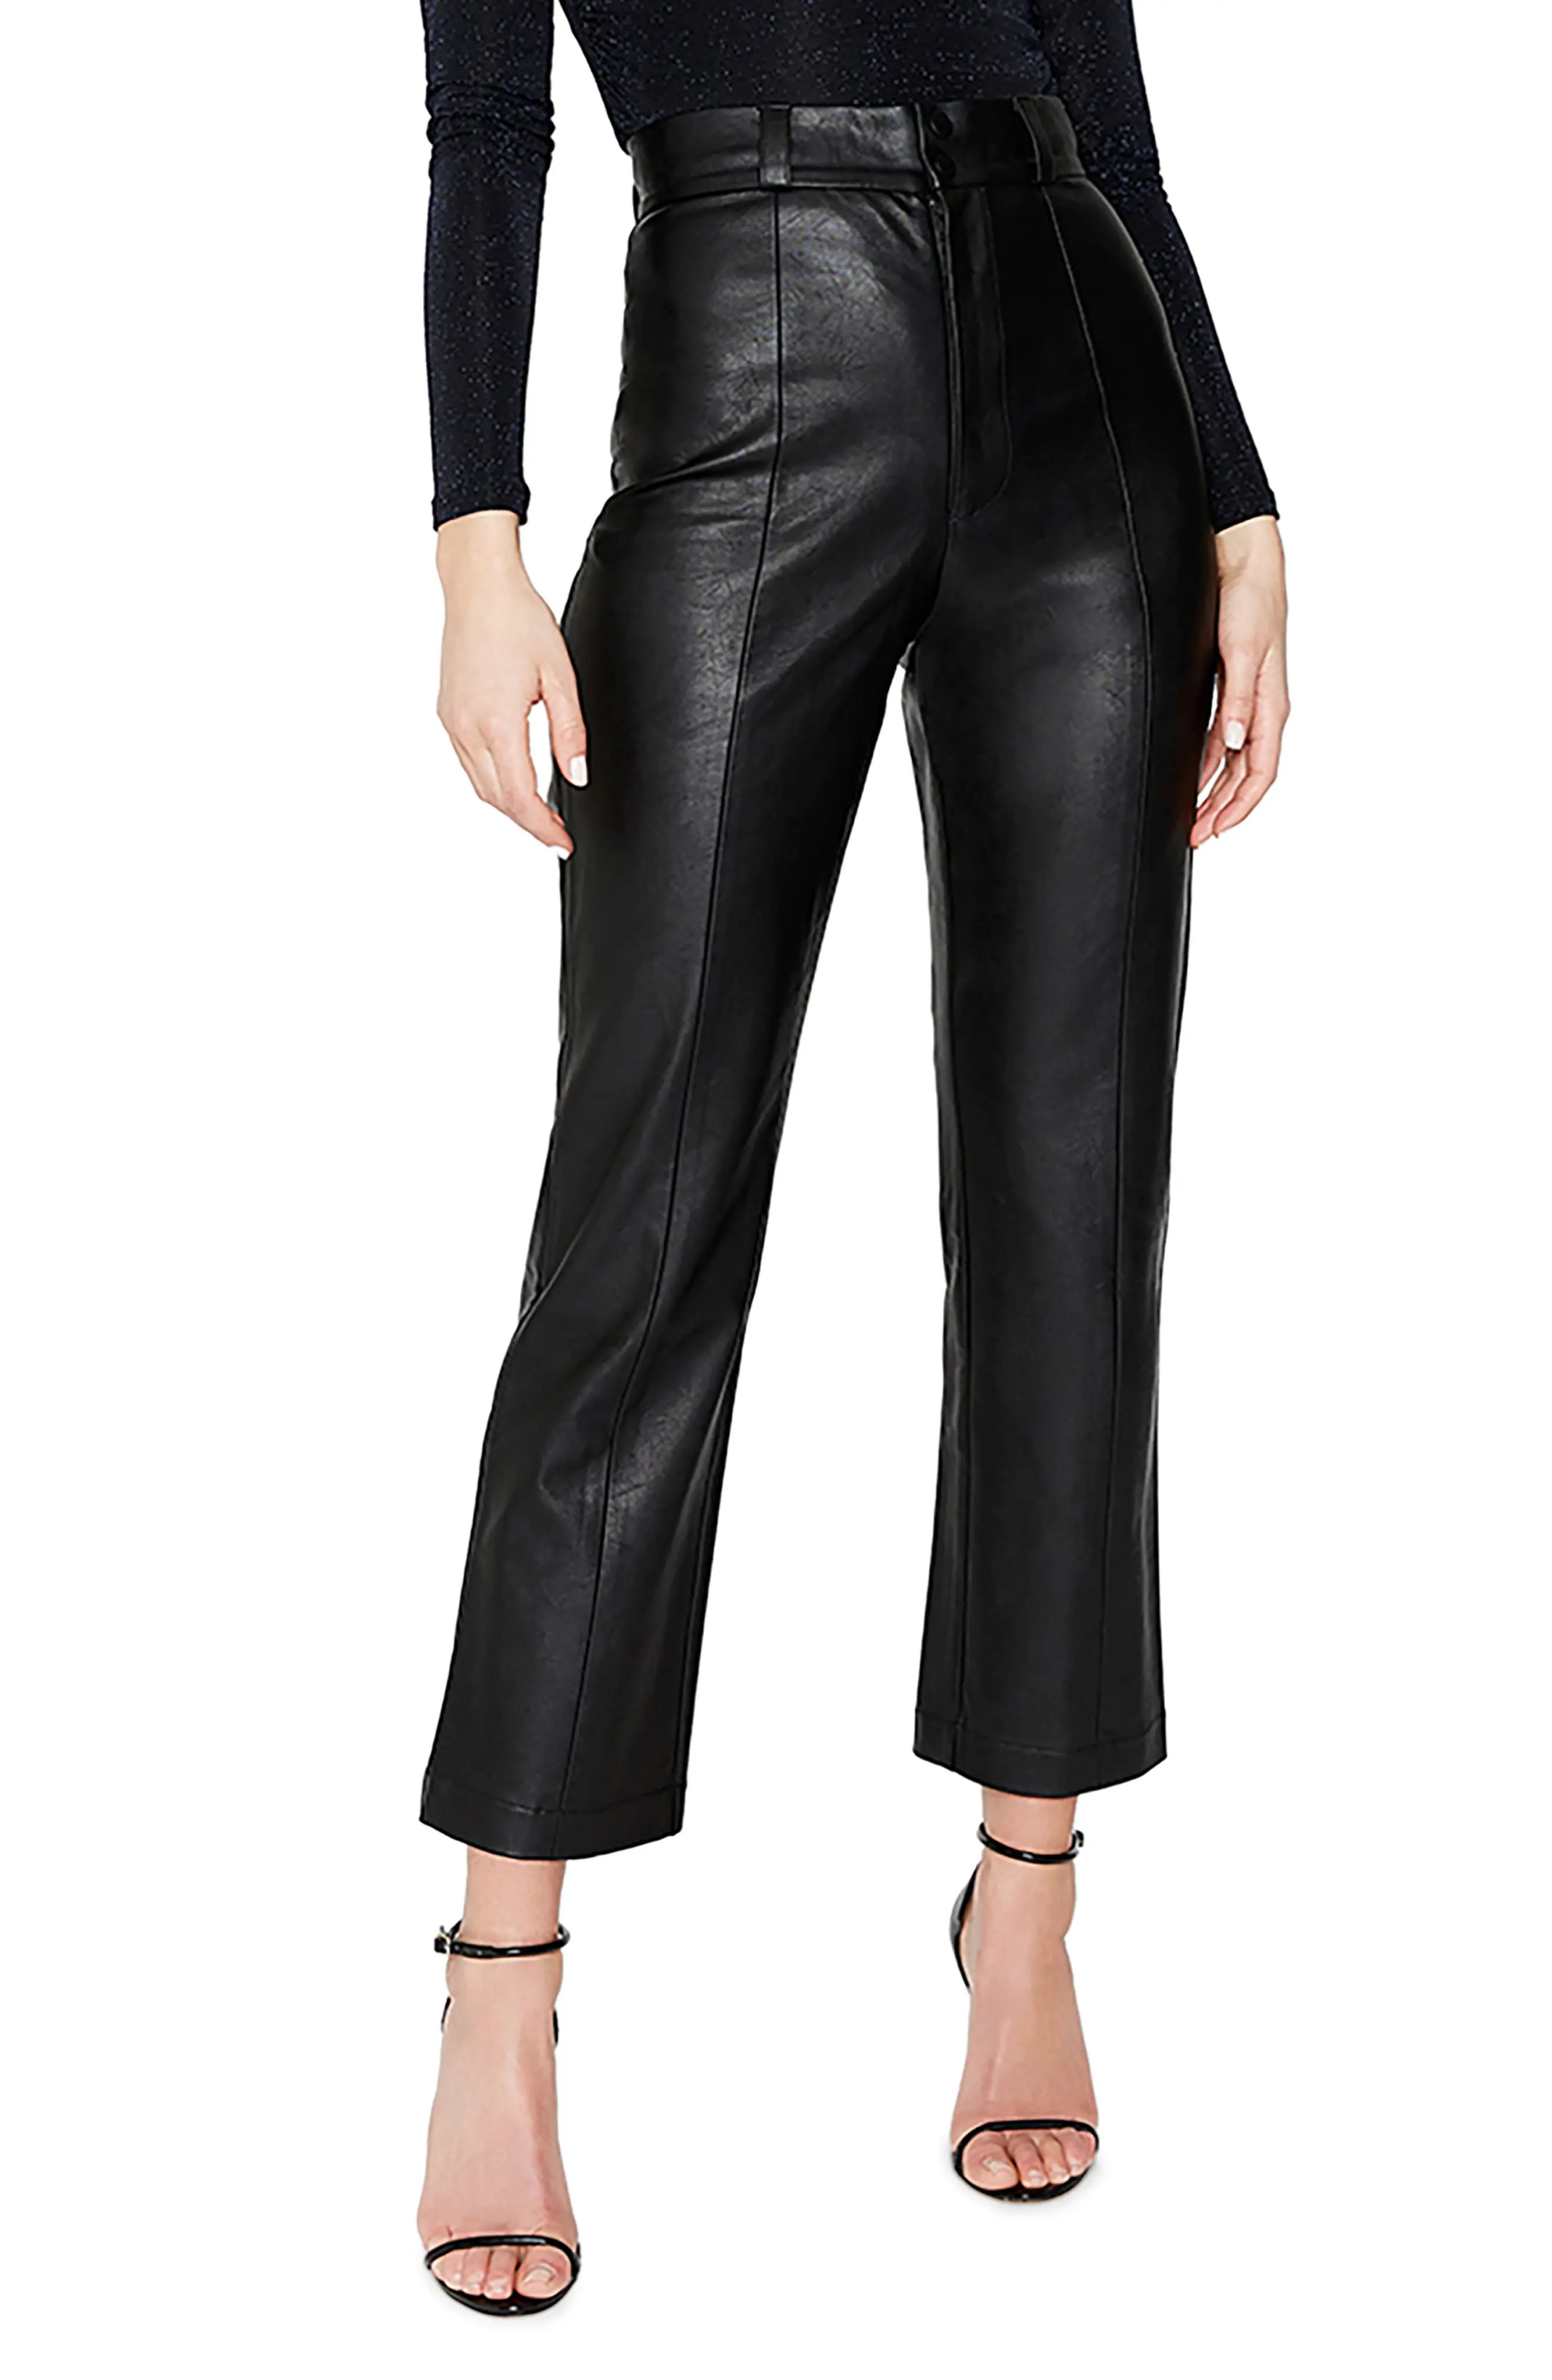 Bardot Faux Leather Pants, Size 8 in Black at Nordstrom | Nordstrom